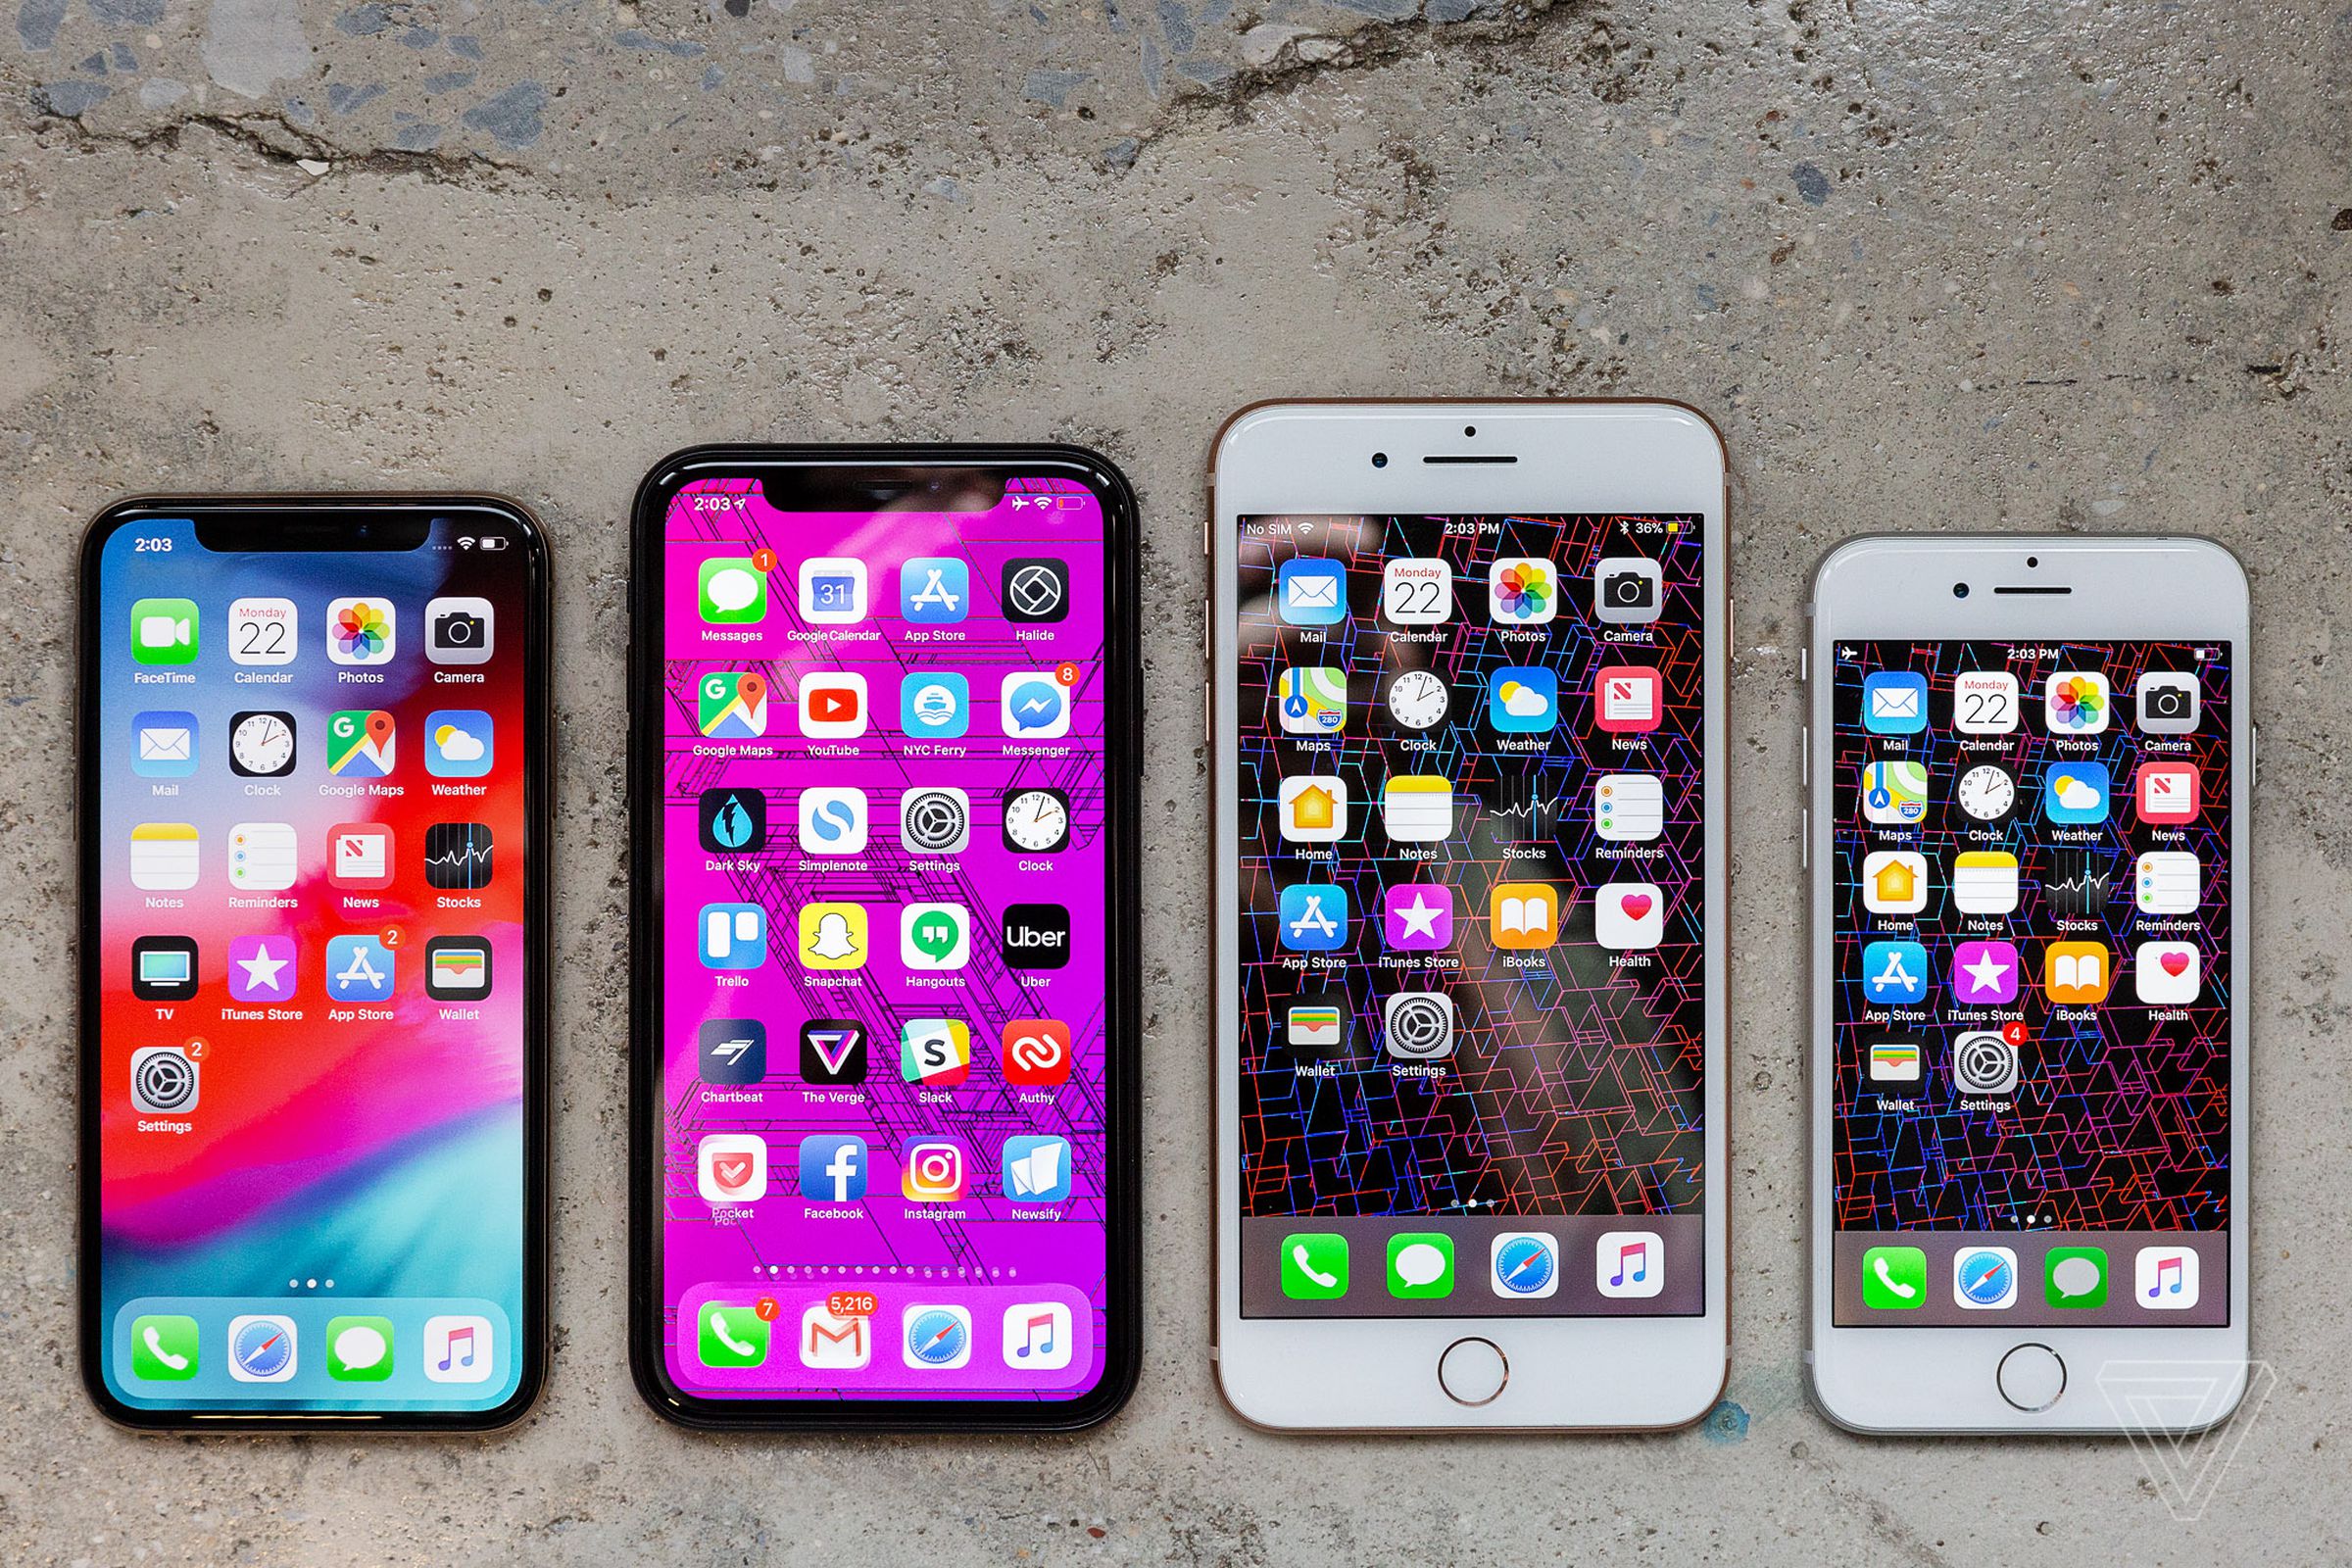 Left to right: iPhone XS, iPhone XR, iPhone 8 Plus, iPhone 8.